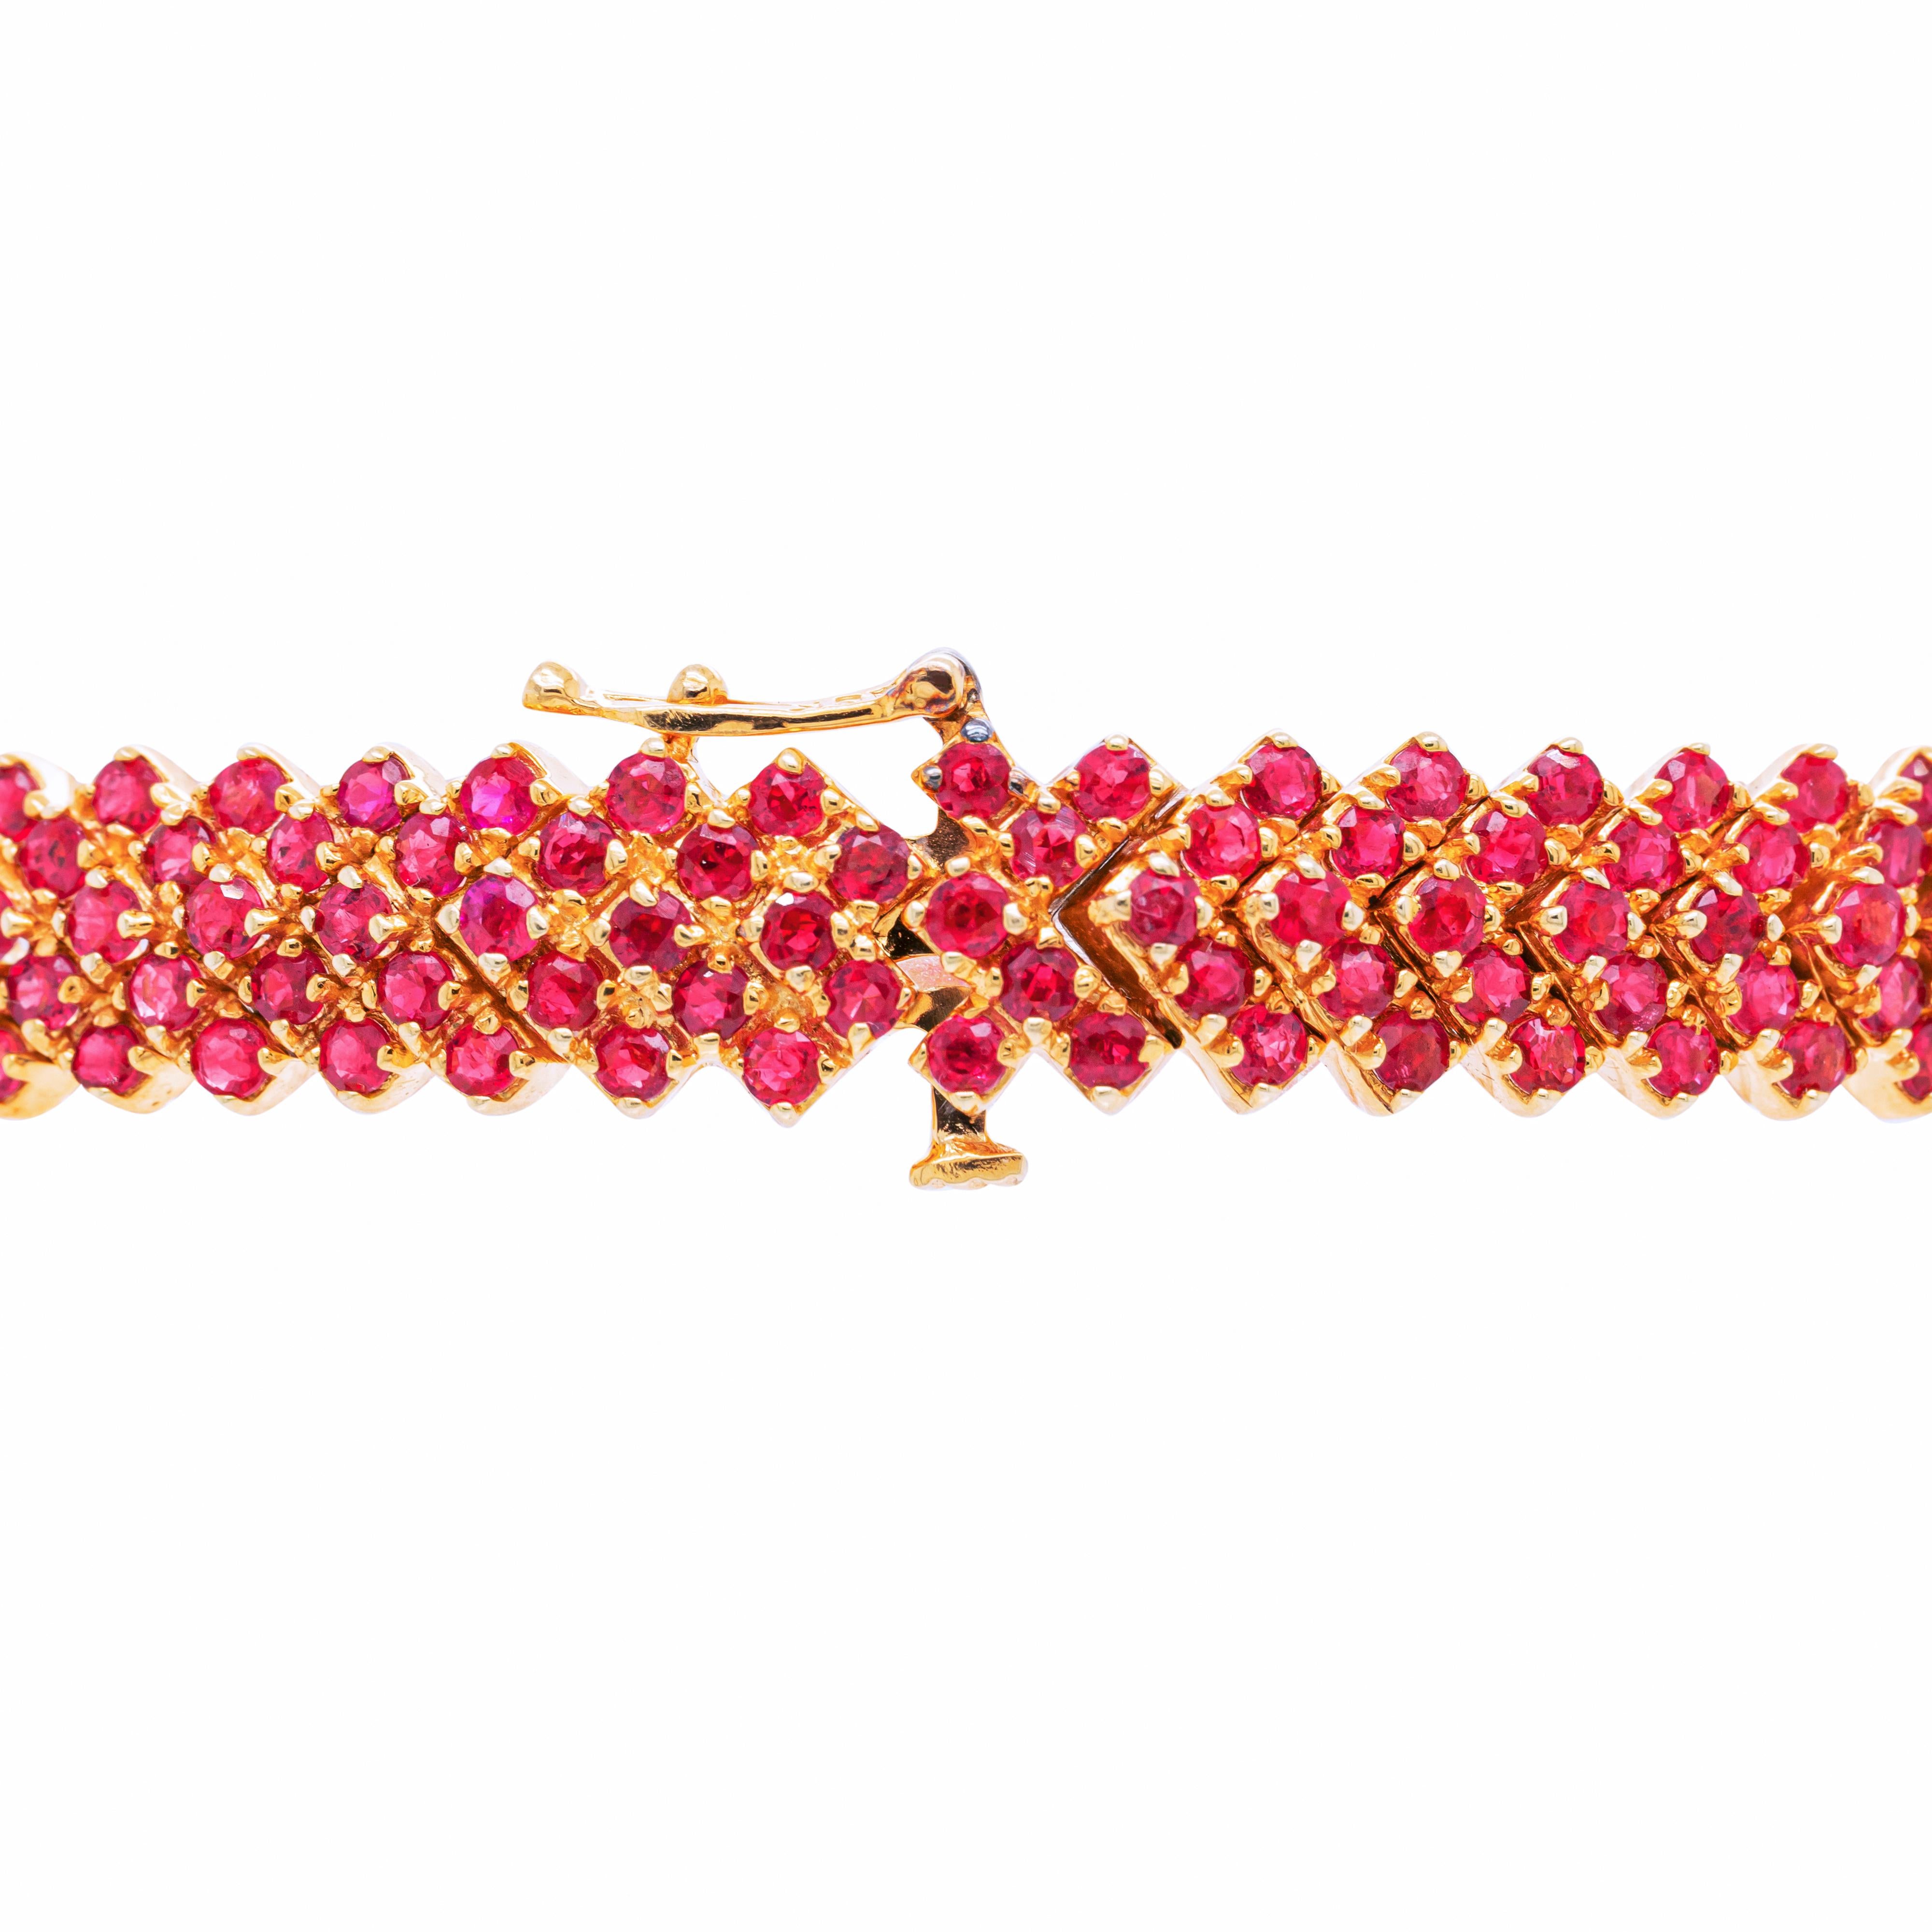 This wonderful bracelet features an impressive 239 round cut rubies, totalling to an approximate weight of 8.00 carats, all mounted in 18 carat yellow gold. The vibrant rubies are set in multiple oblique rows, beautifully interrupted by three rows